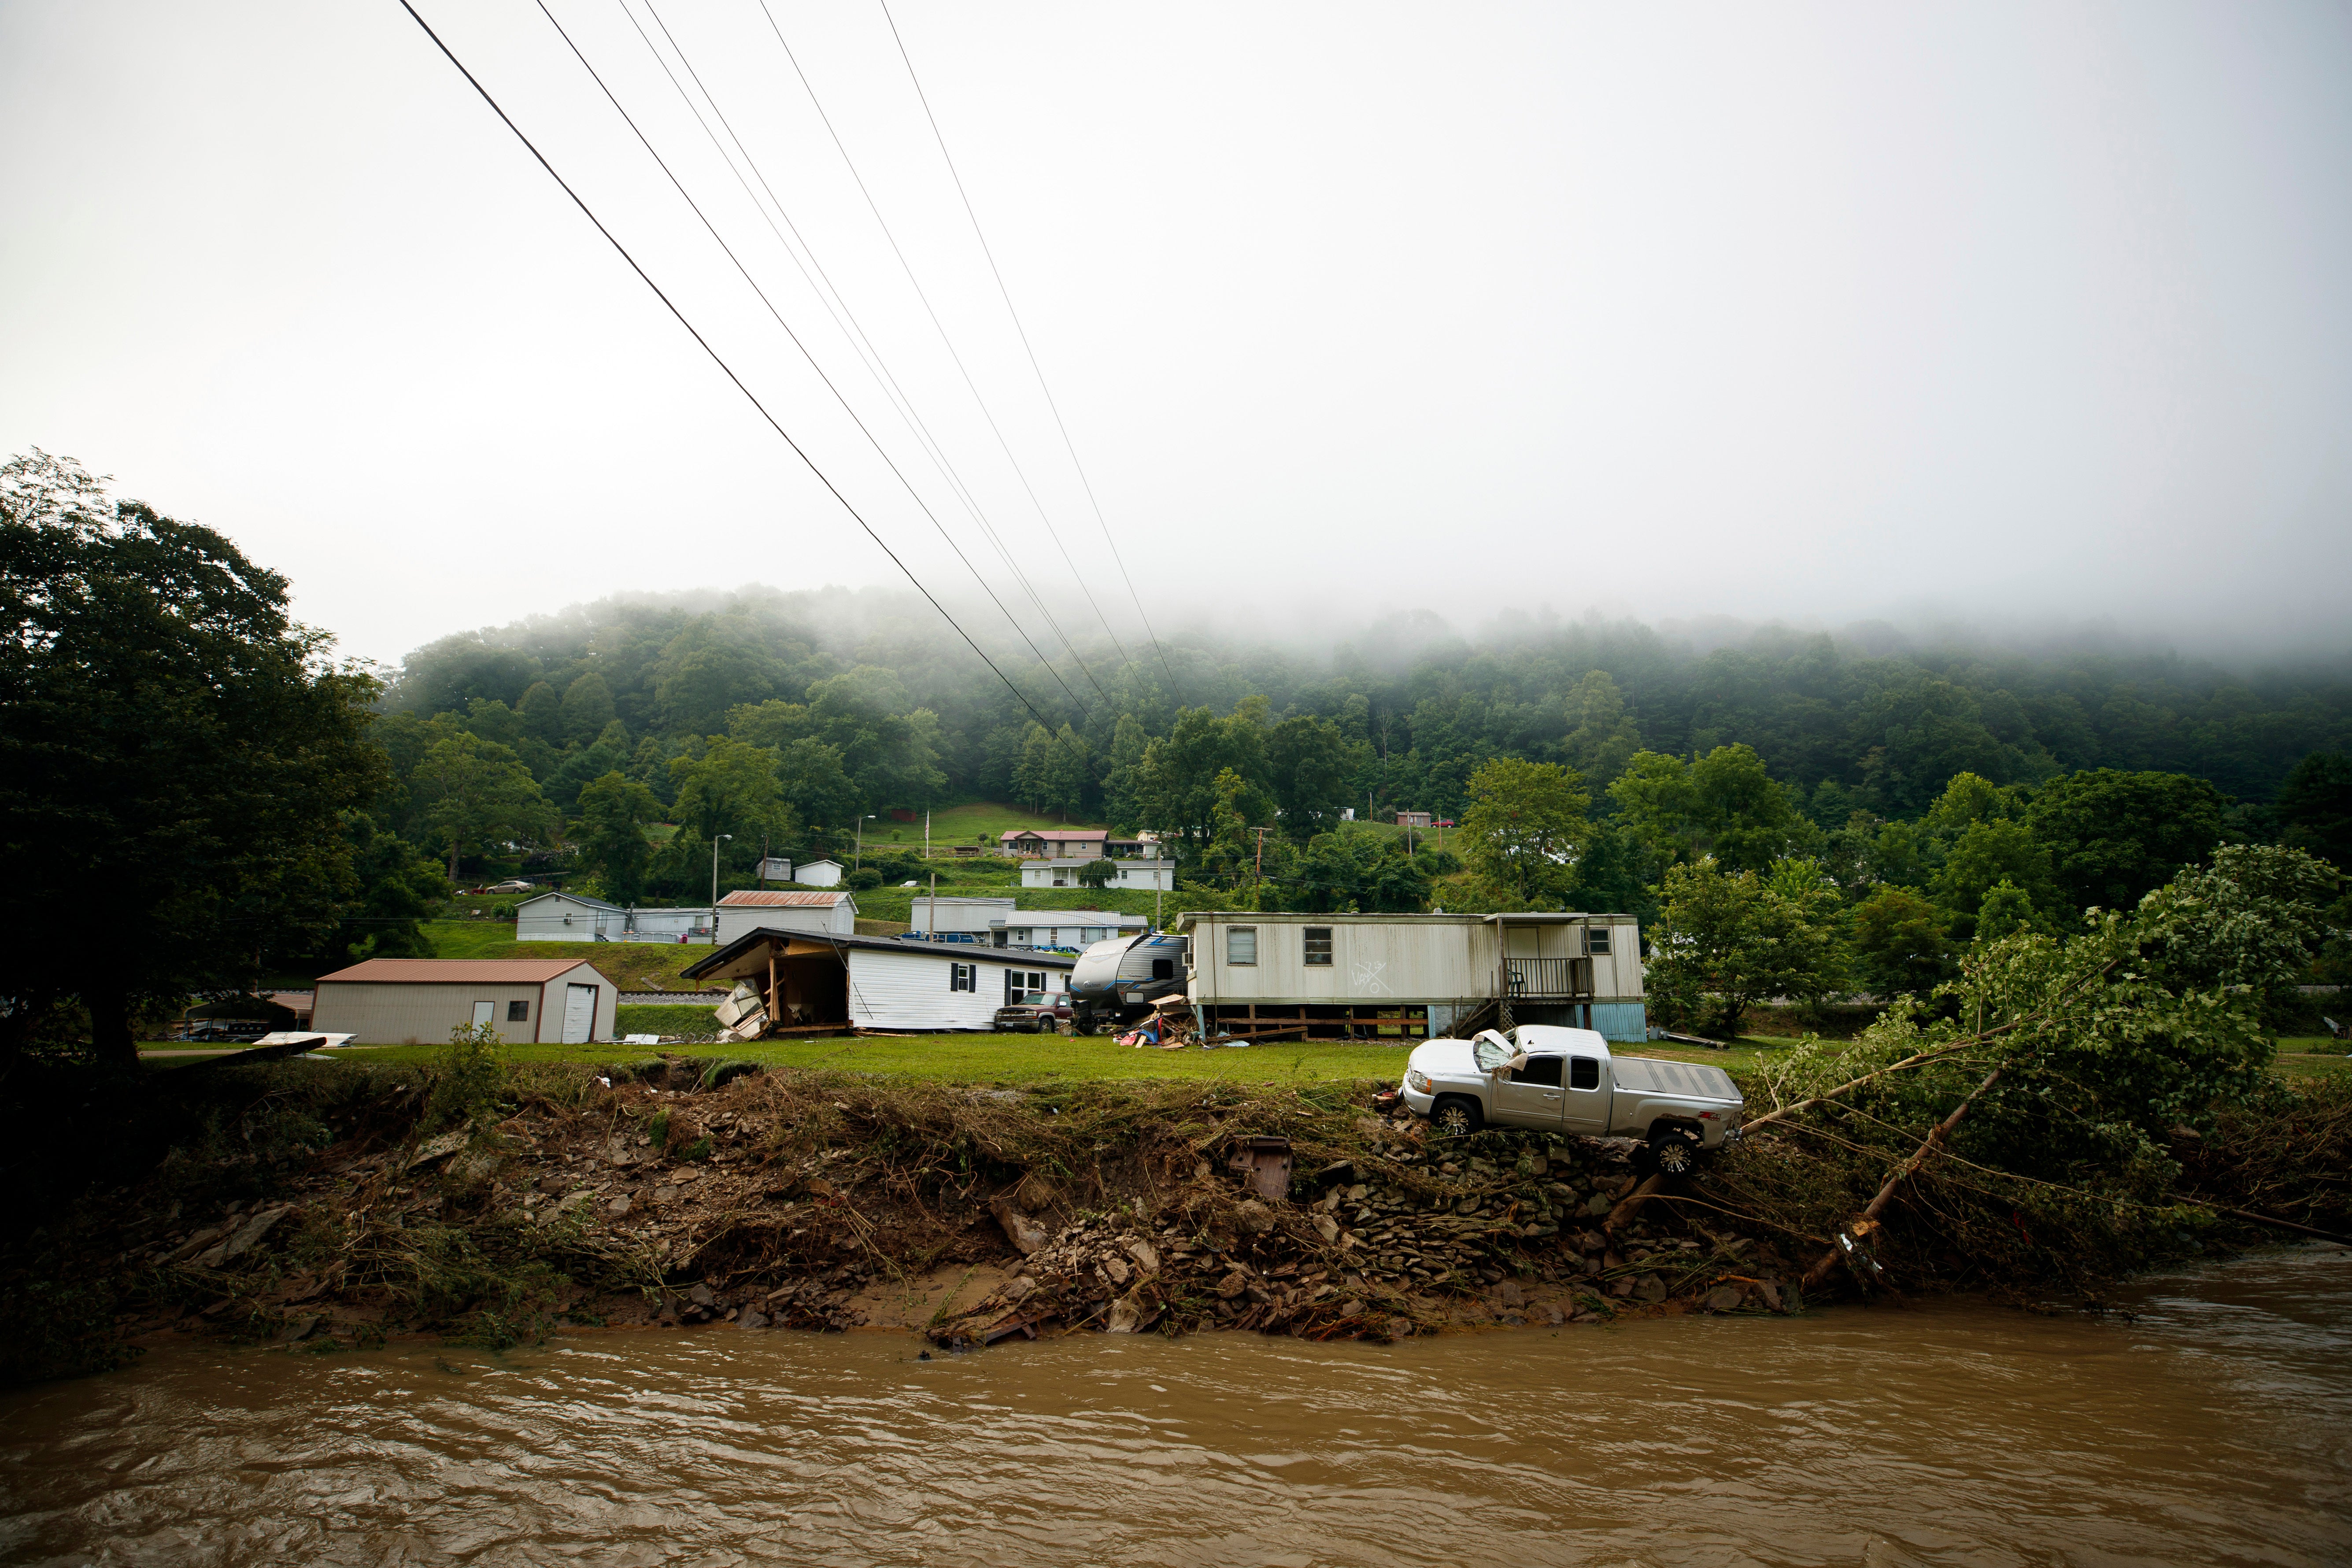 Virginia floods leave 3 people unaccounted for, crews still searching